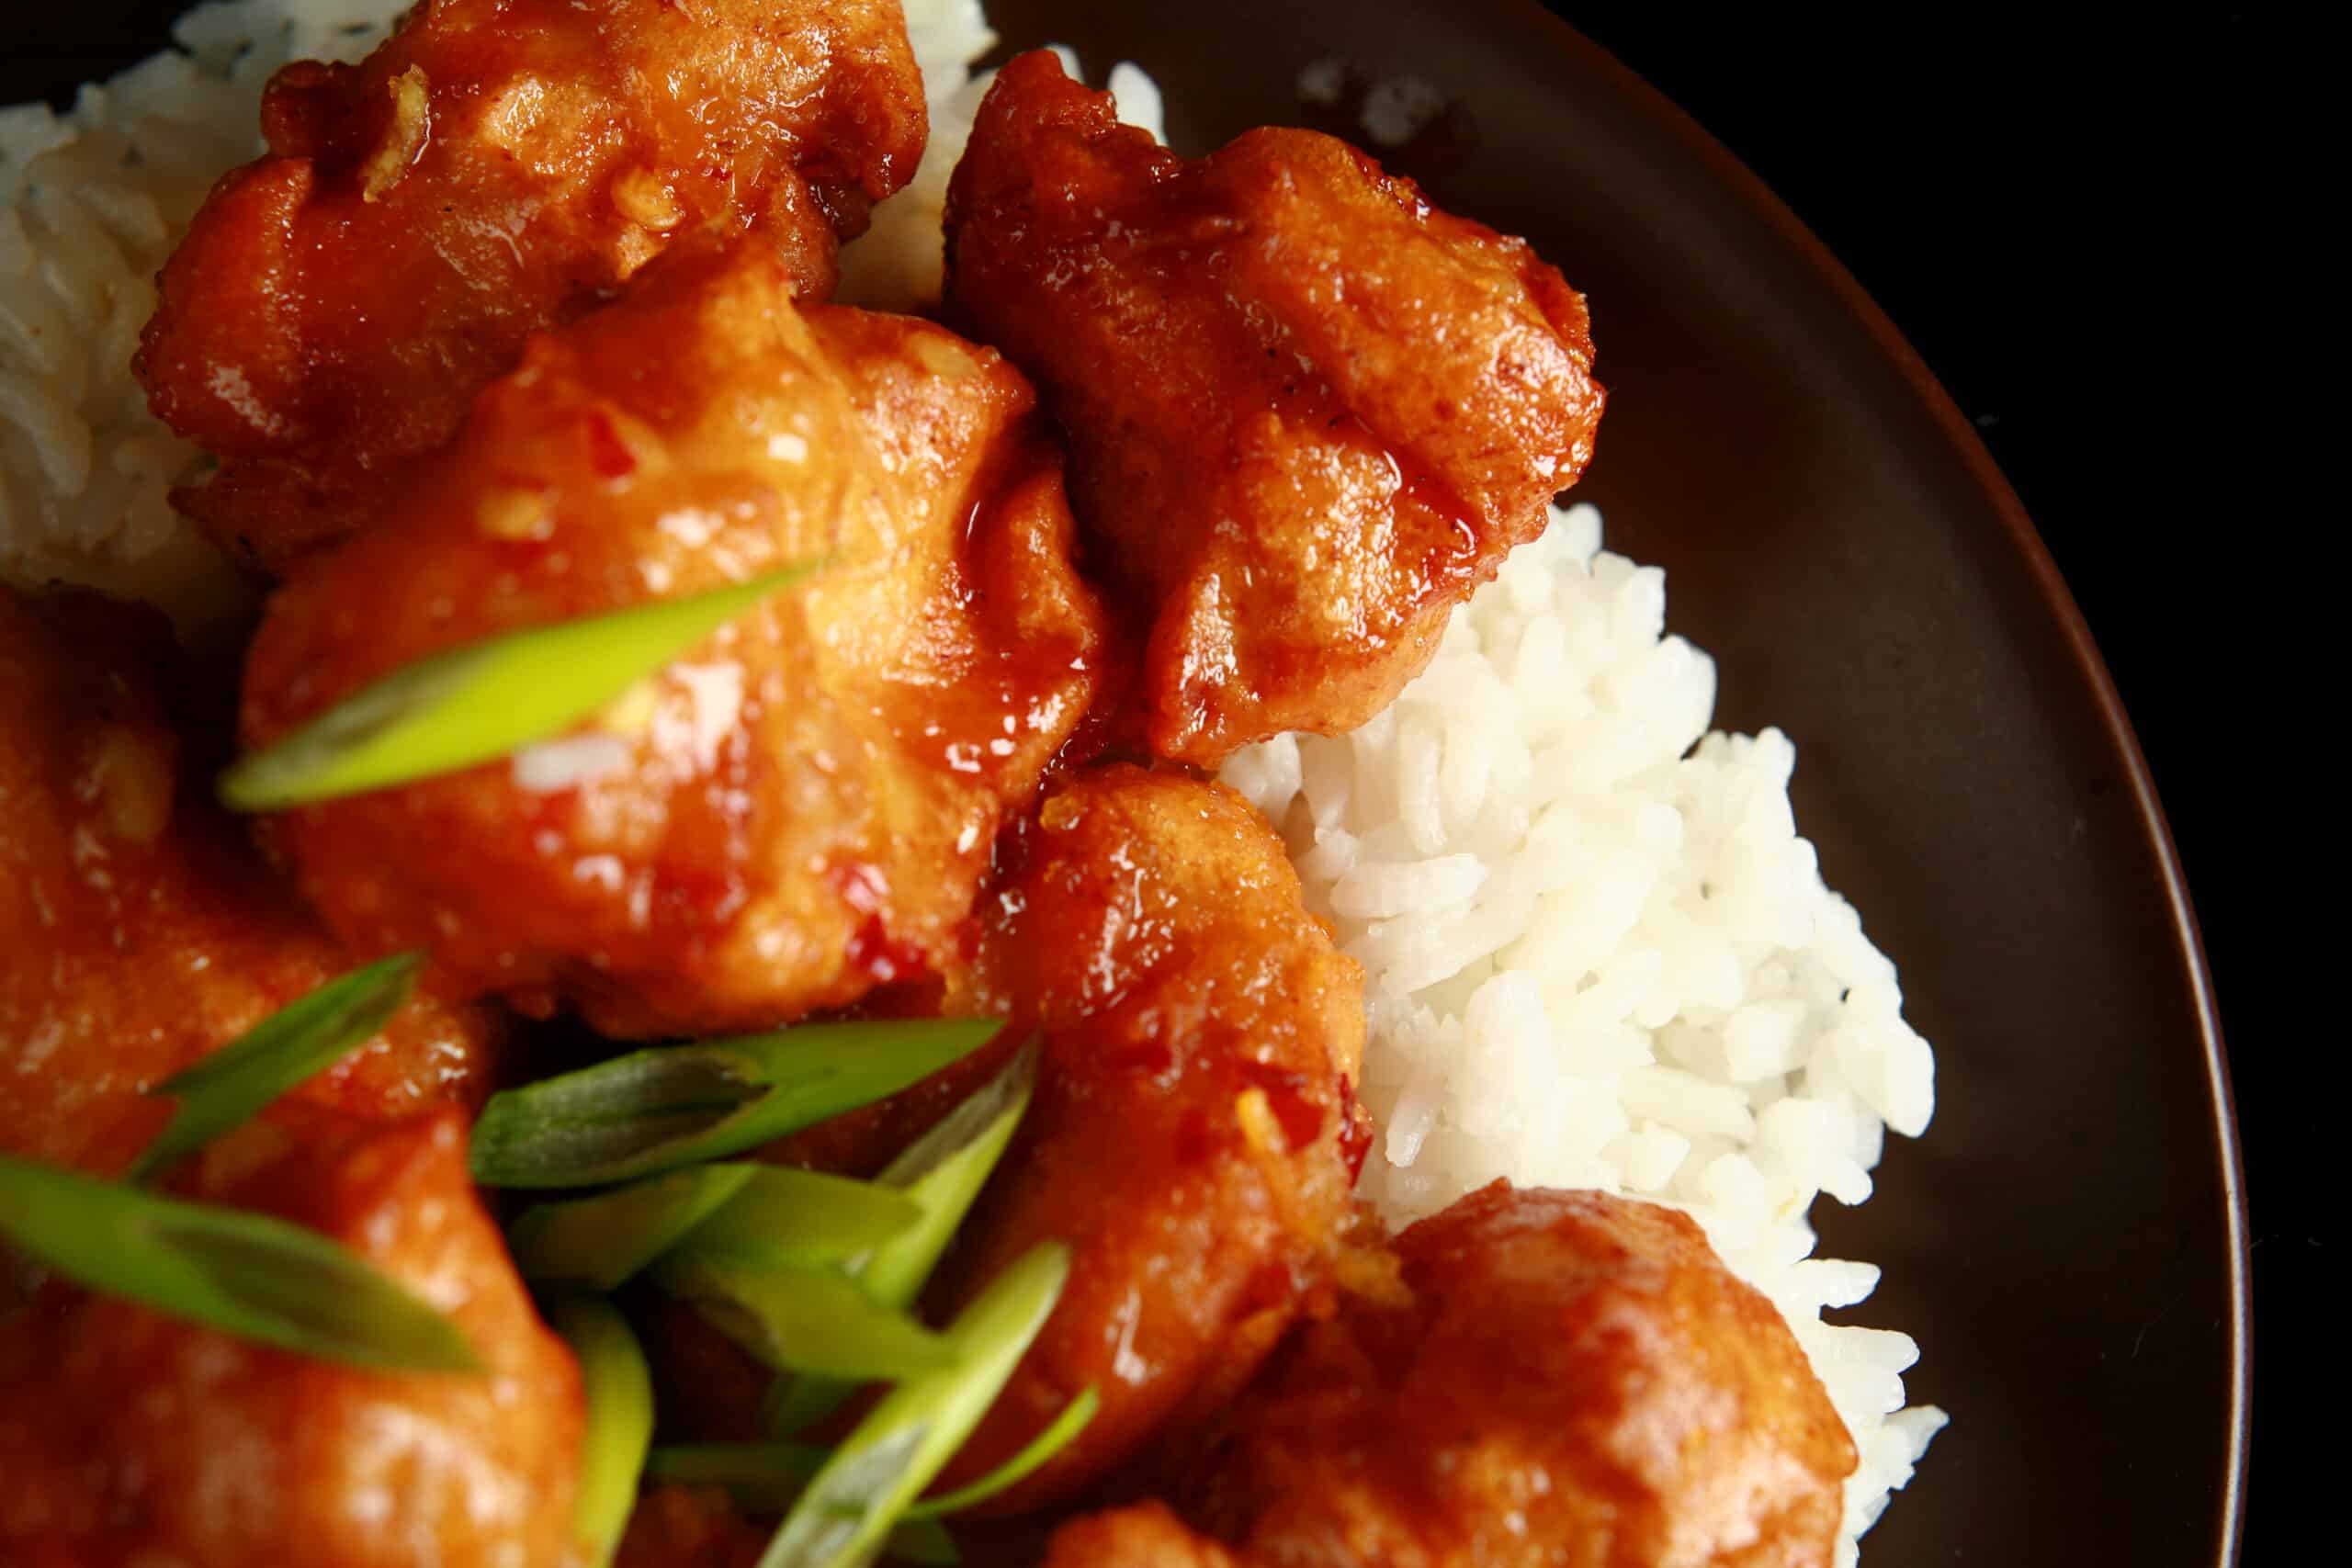 A big helping of gluten free orange chicken: Chunks of battered and deep fried chicken coated in a glossy orange sauce, garnished with sliced green onions, and served over a bed of rice.